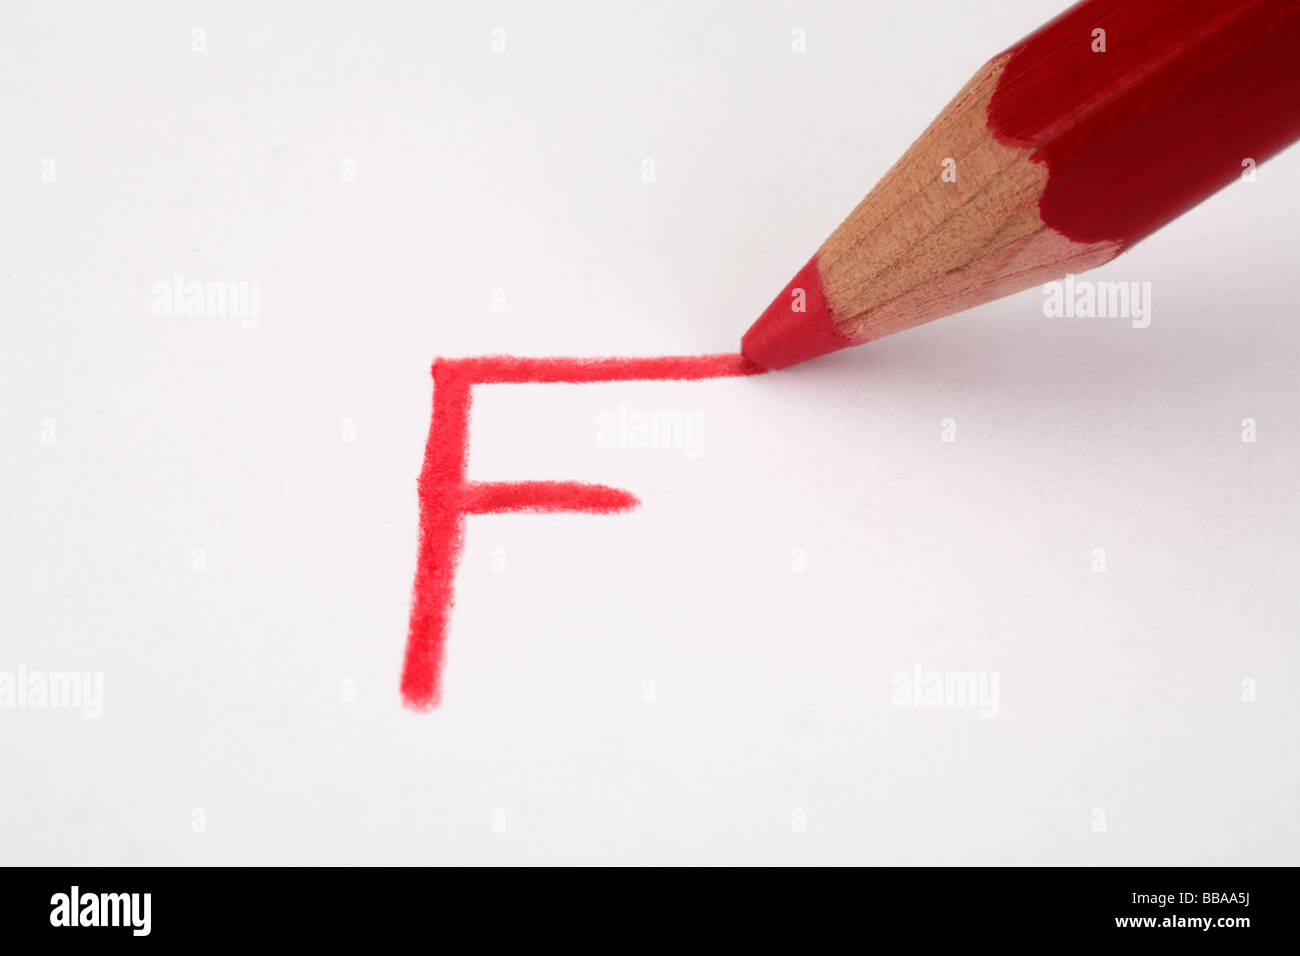 Red pencil marking an F on paper close up Stock Photo